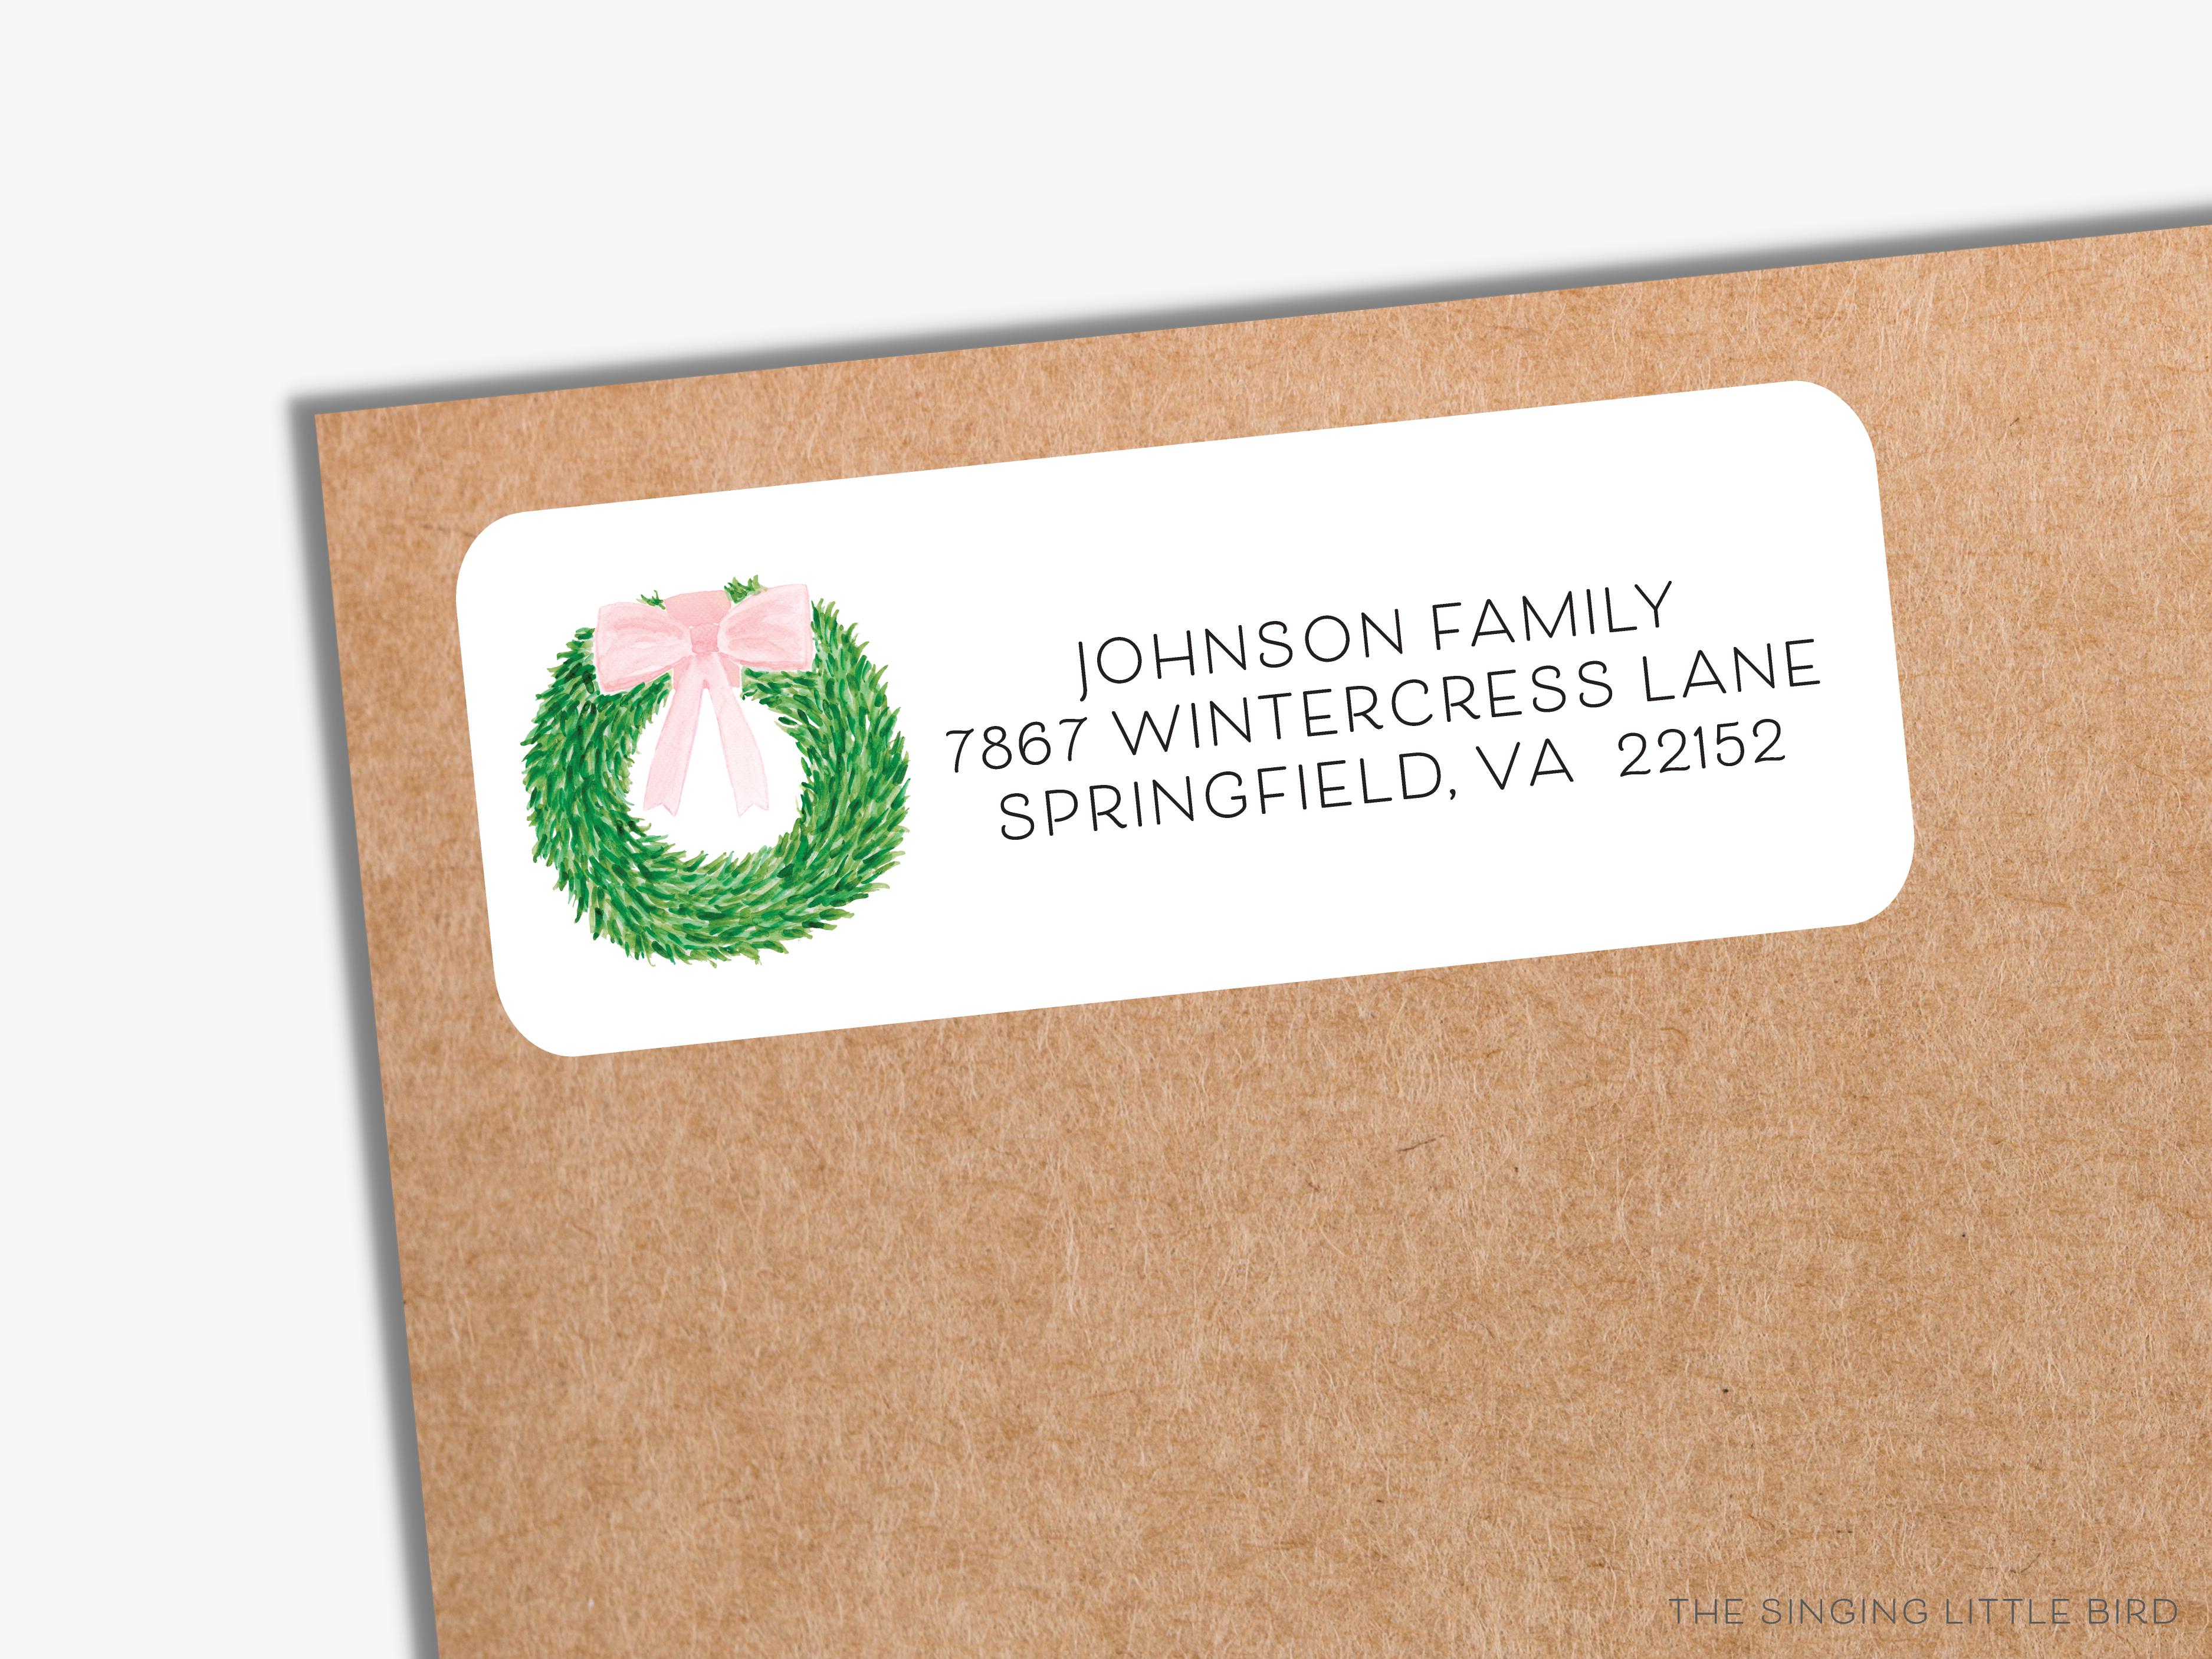 Wreath With Pink Bow Return Address Labels-These personalized return address labels are 2.625" x 1" and feature our hand-painted watercolor wreath with pink bow, printed in the USA on beautiful matte finish labels. These make great gifts for yourself or the spring time lover.-The Singing Little Bird